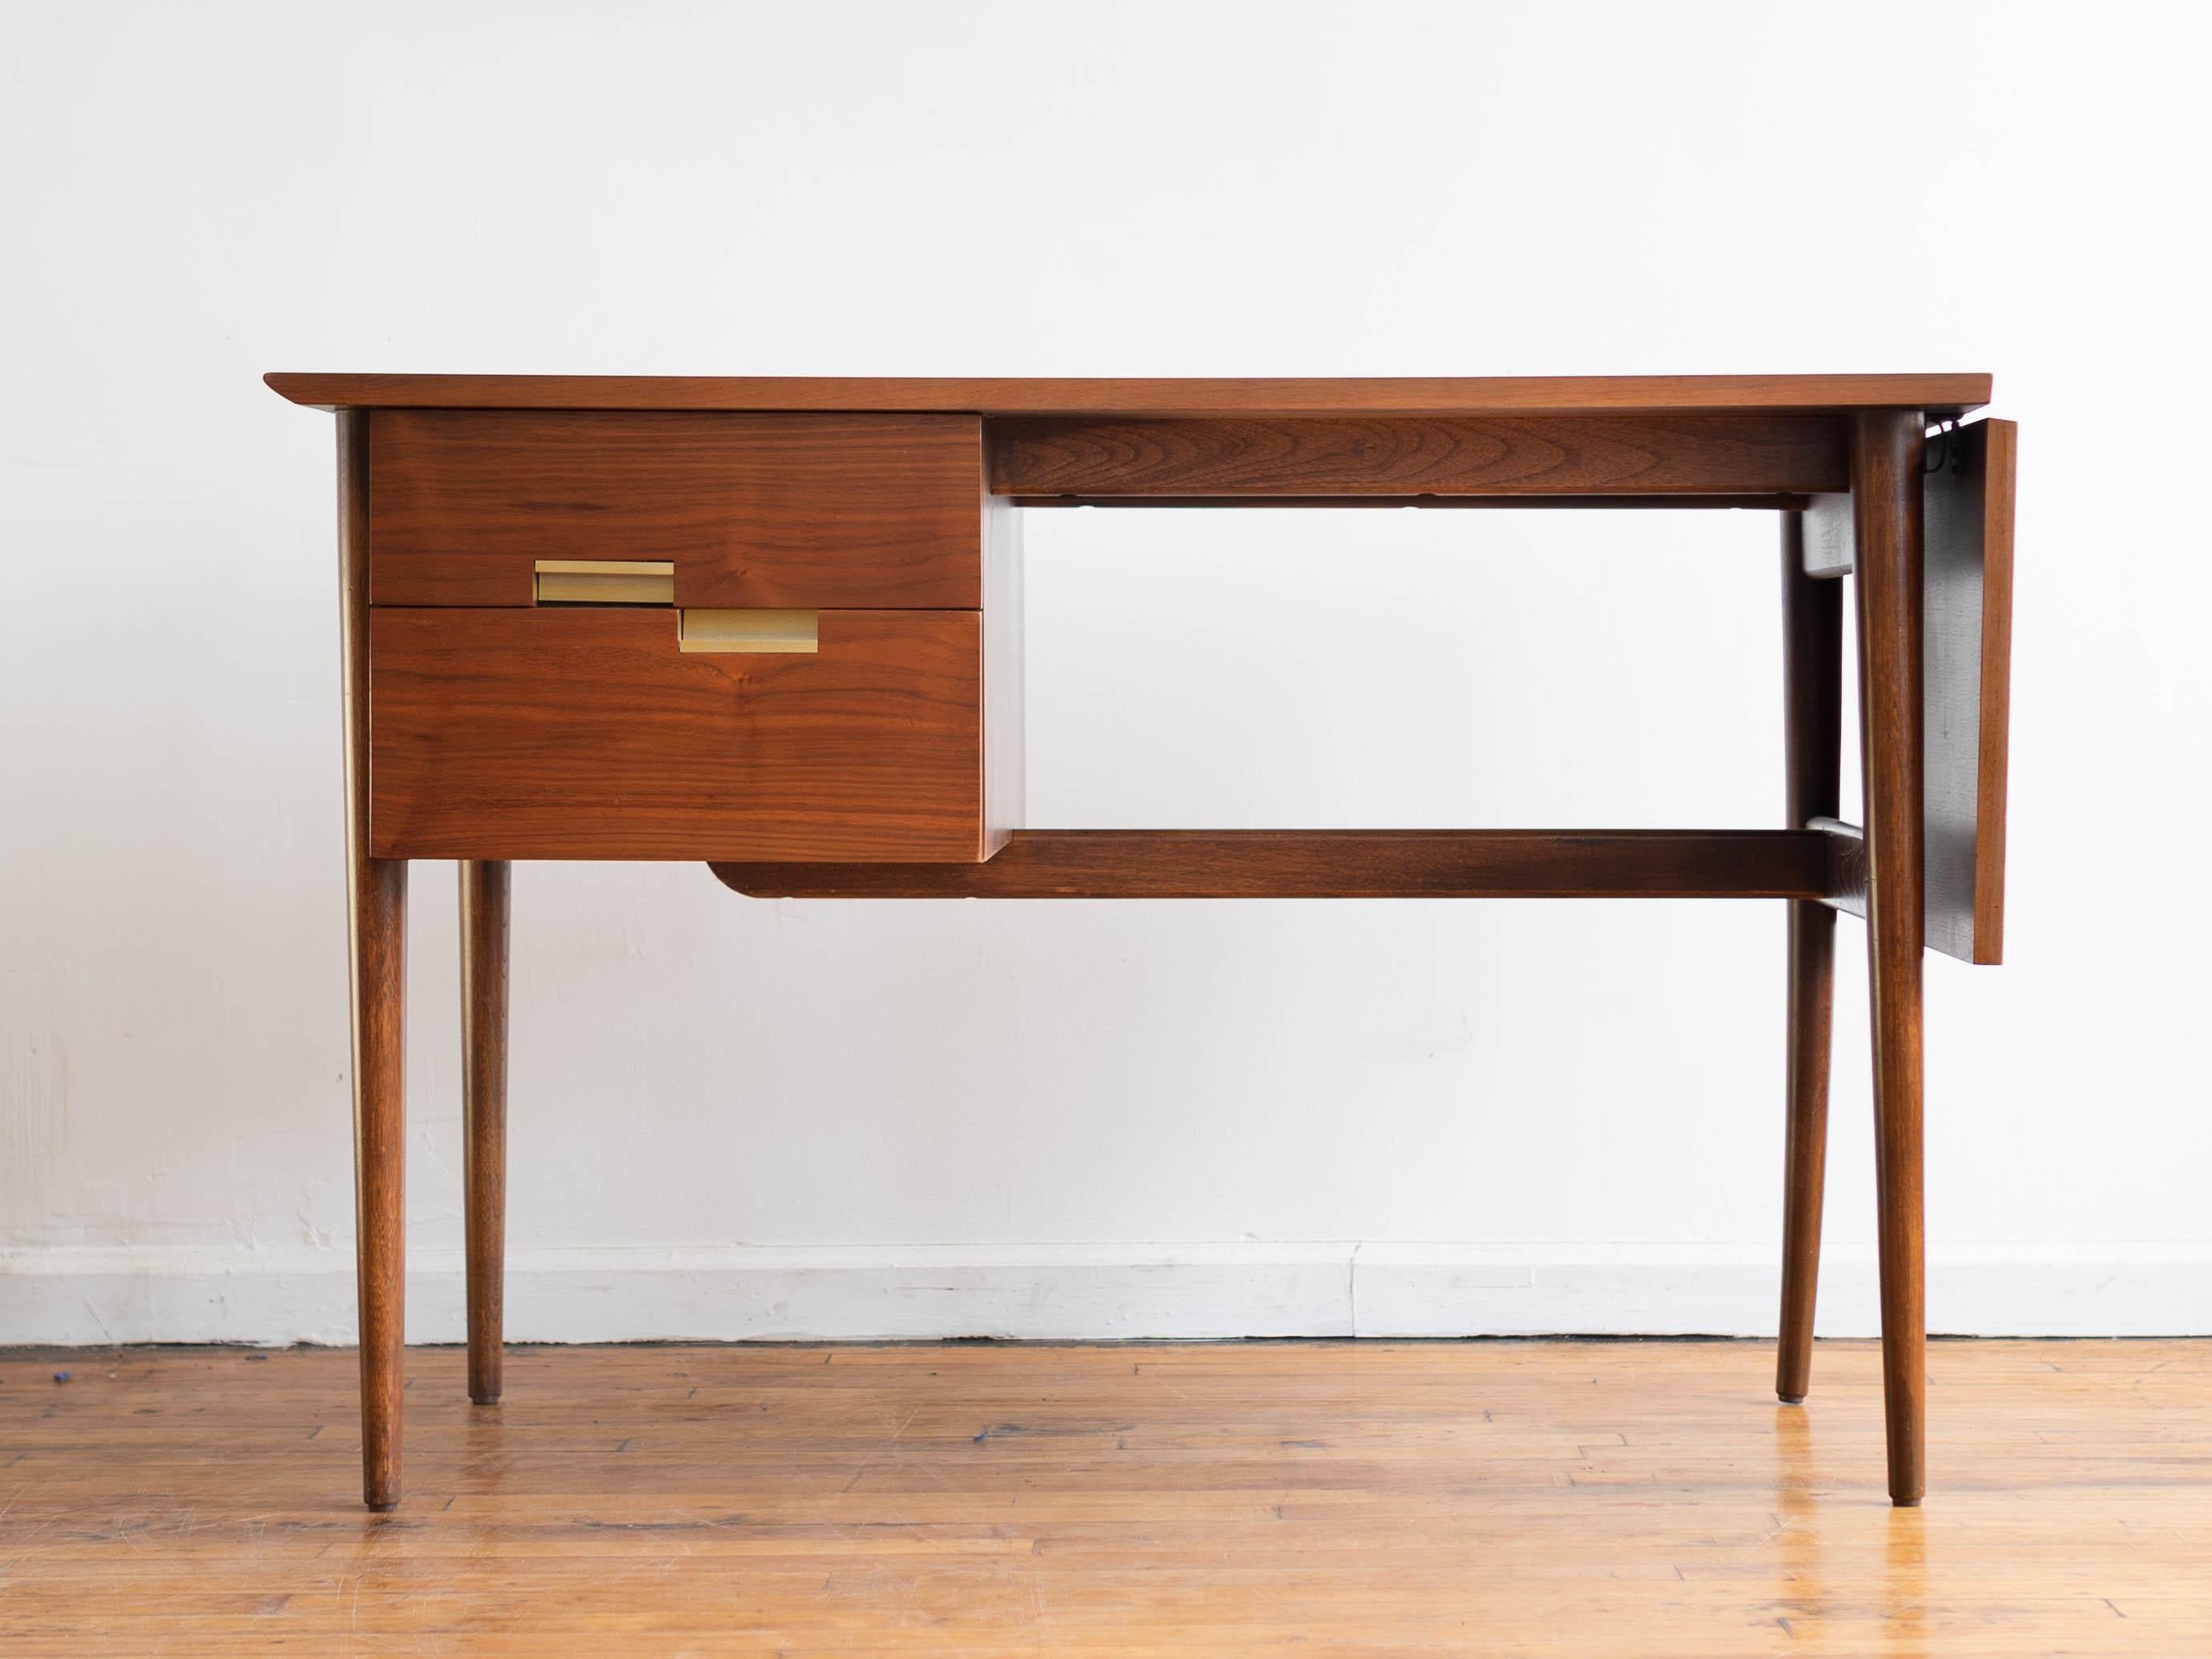 44” x 23” x 29.5”H; leaf adds 14”; knee hole is approx. 22.5” x 28.5”H

Vintage Mid-Century Modern American of Martinsville Accord petite drop leaf writing desk in walnut. Warm walnut woodgrain with two spacious drawers a contrasting-grain drop